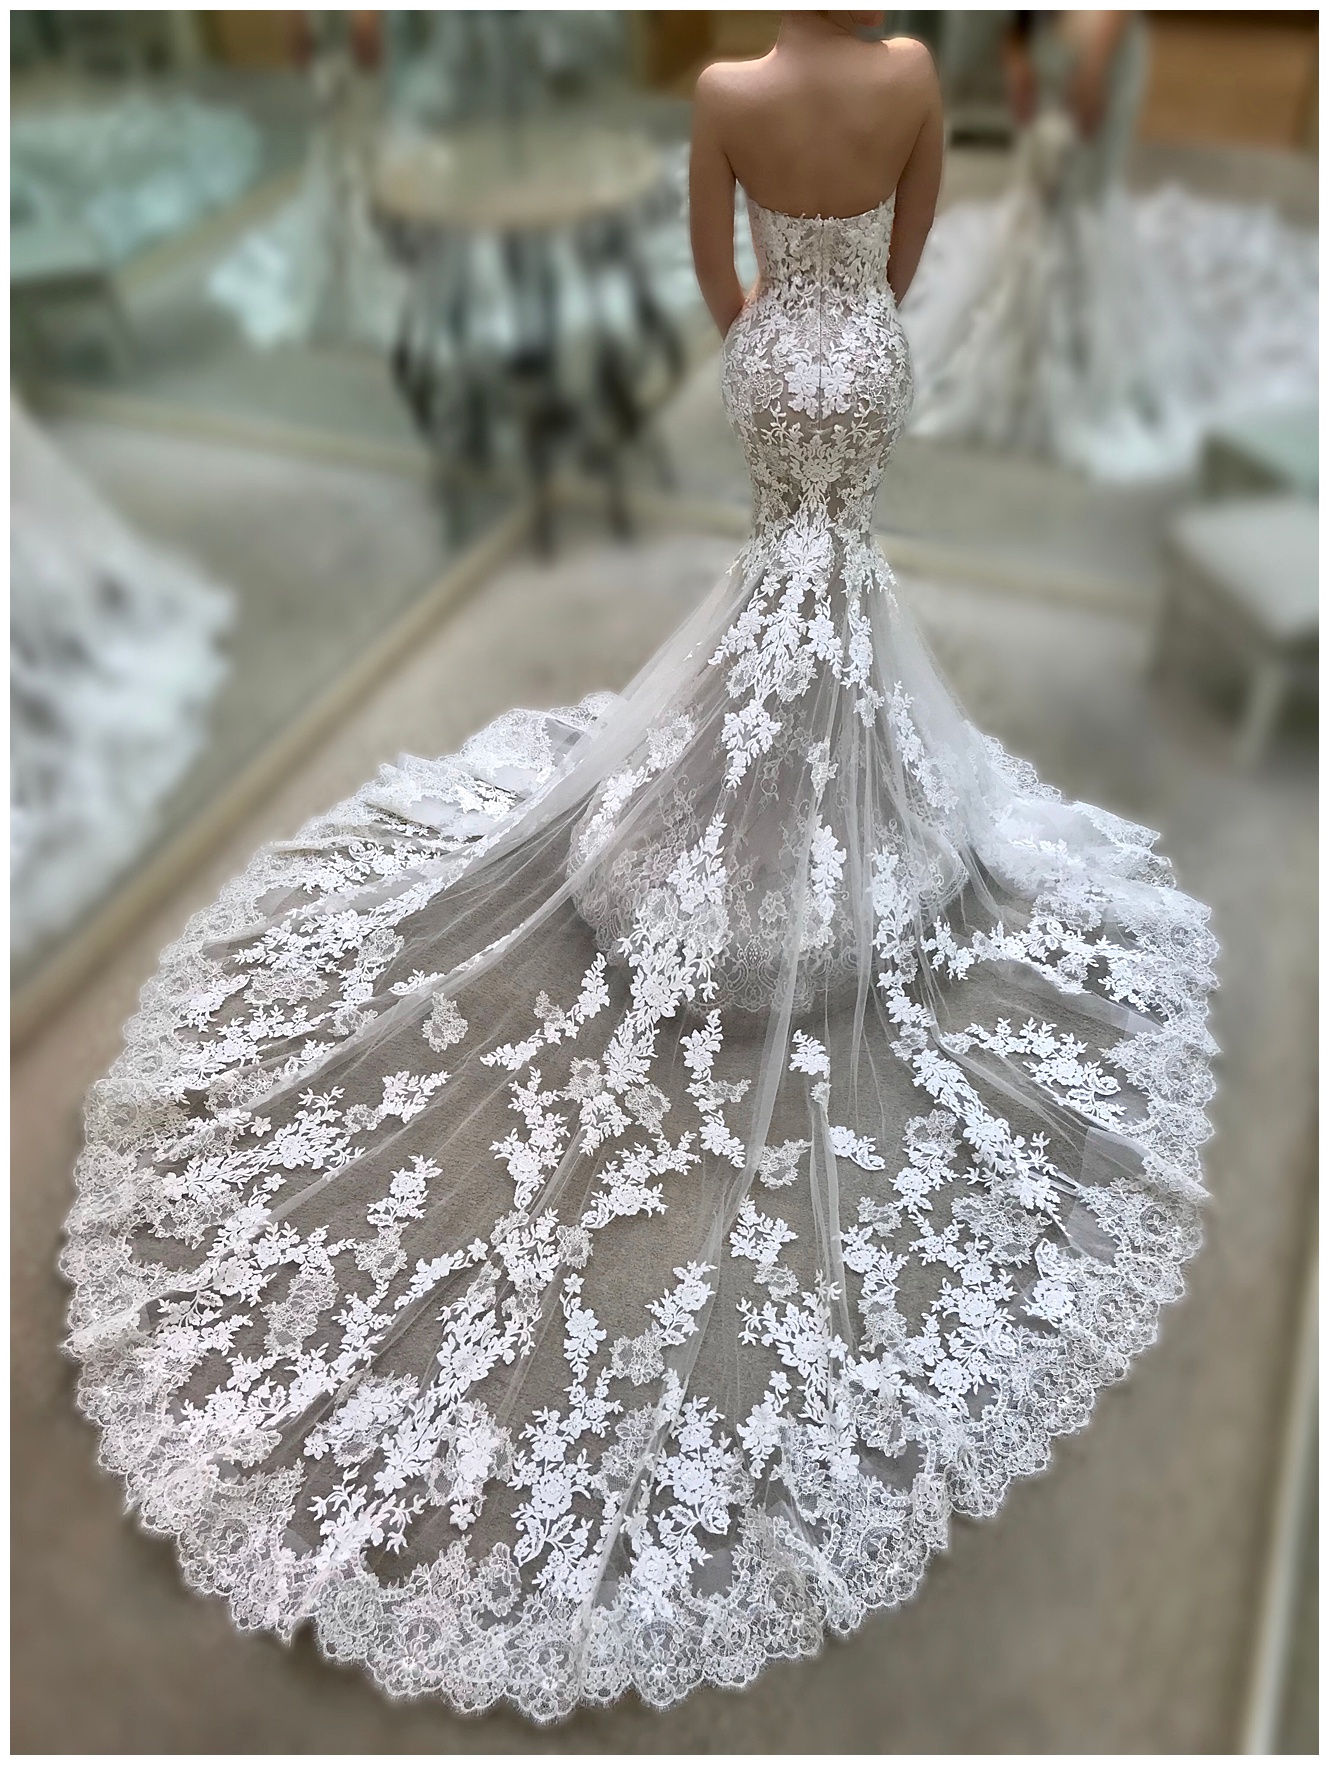 fitted wedding dress with long train